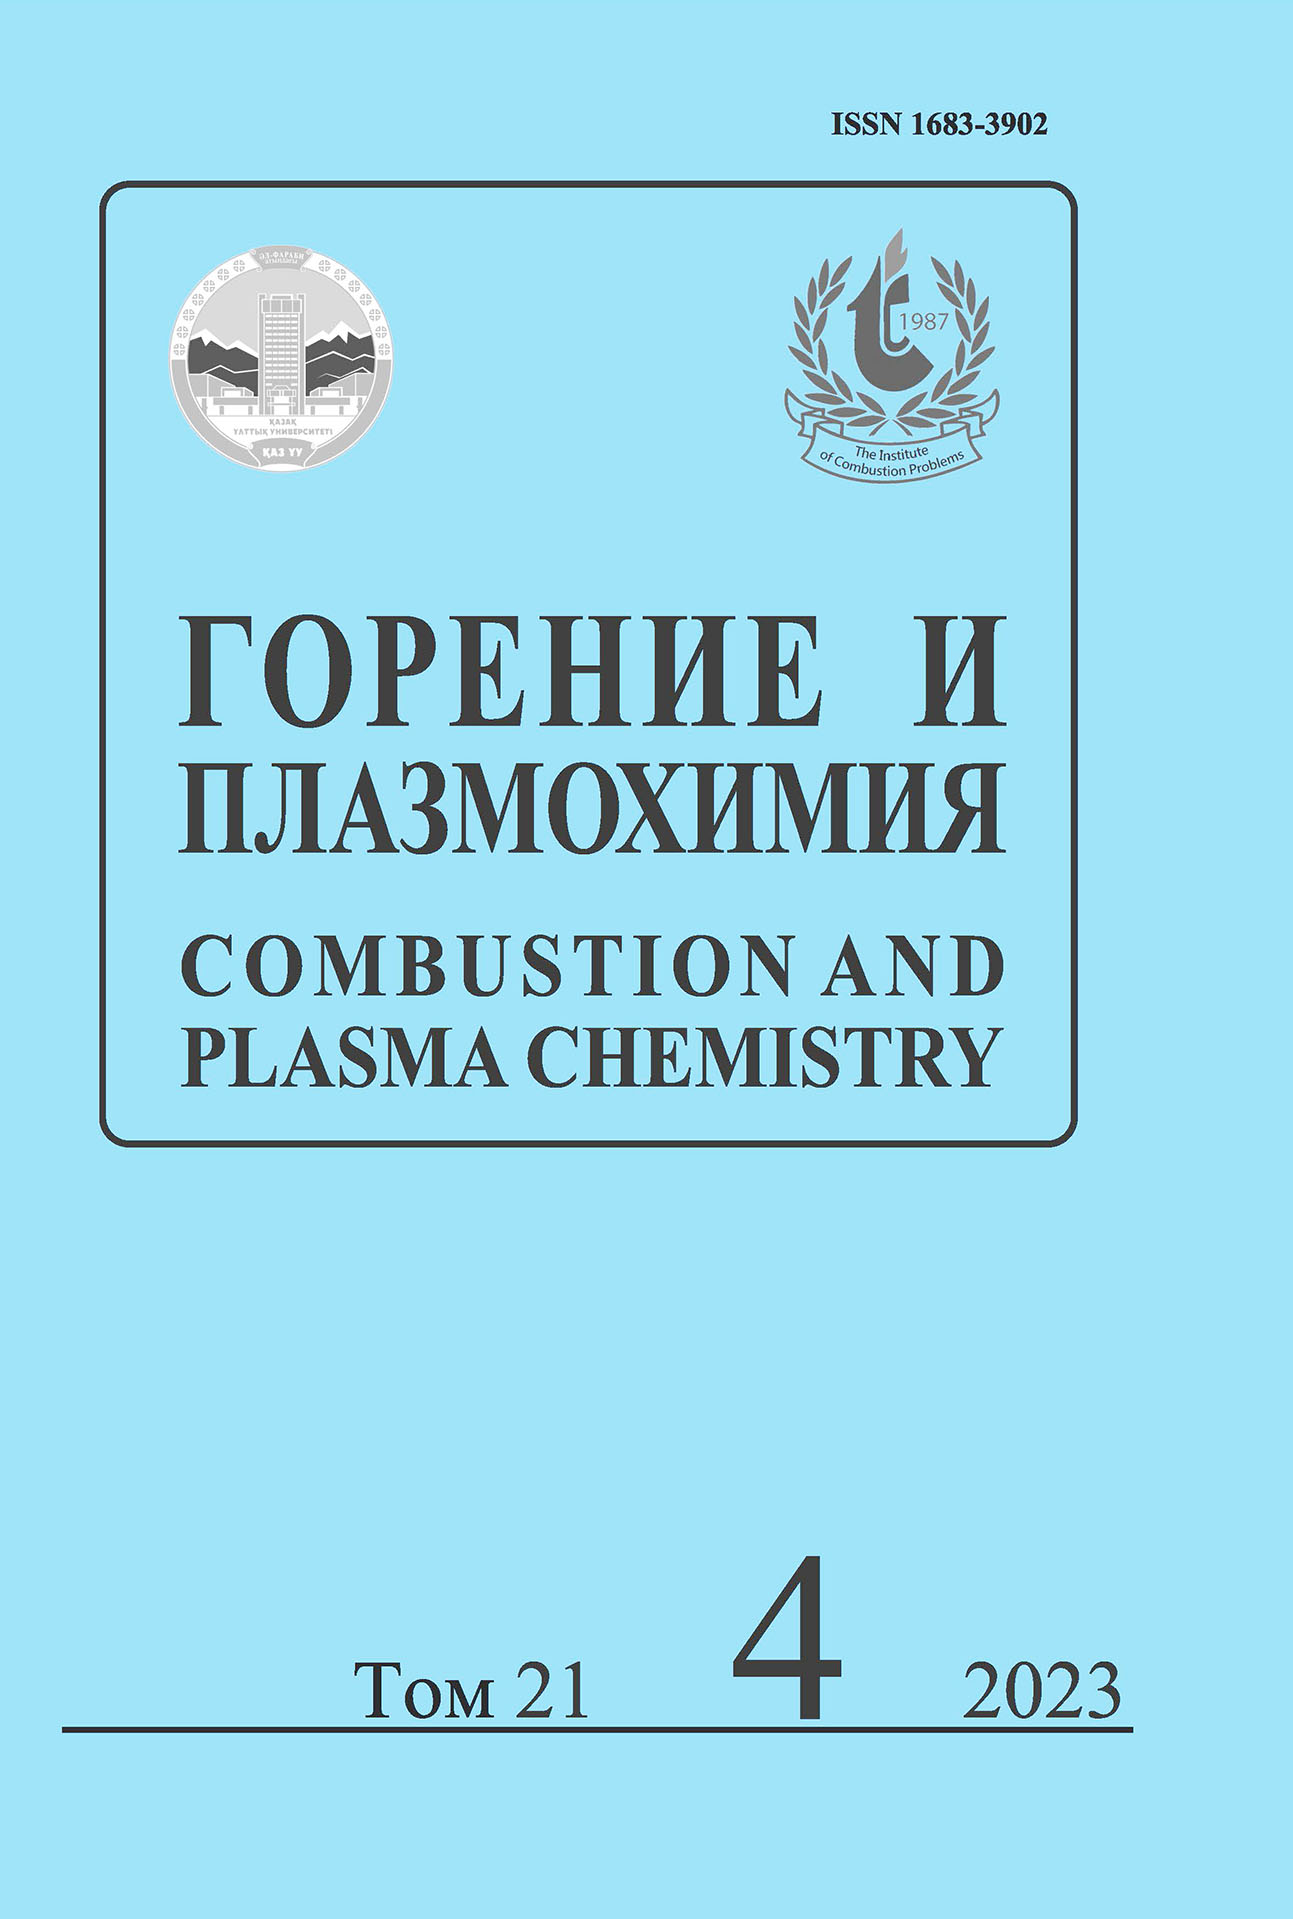 COMBUSTION AND PLASMA CHEMISTRY